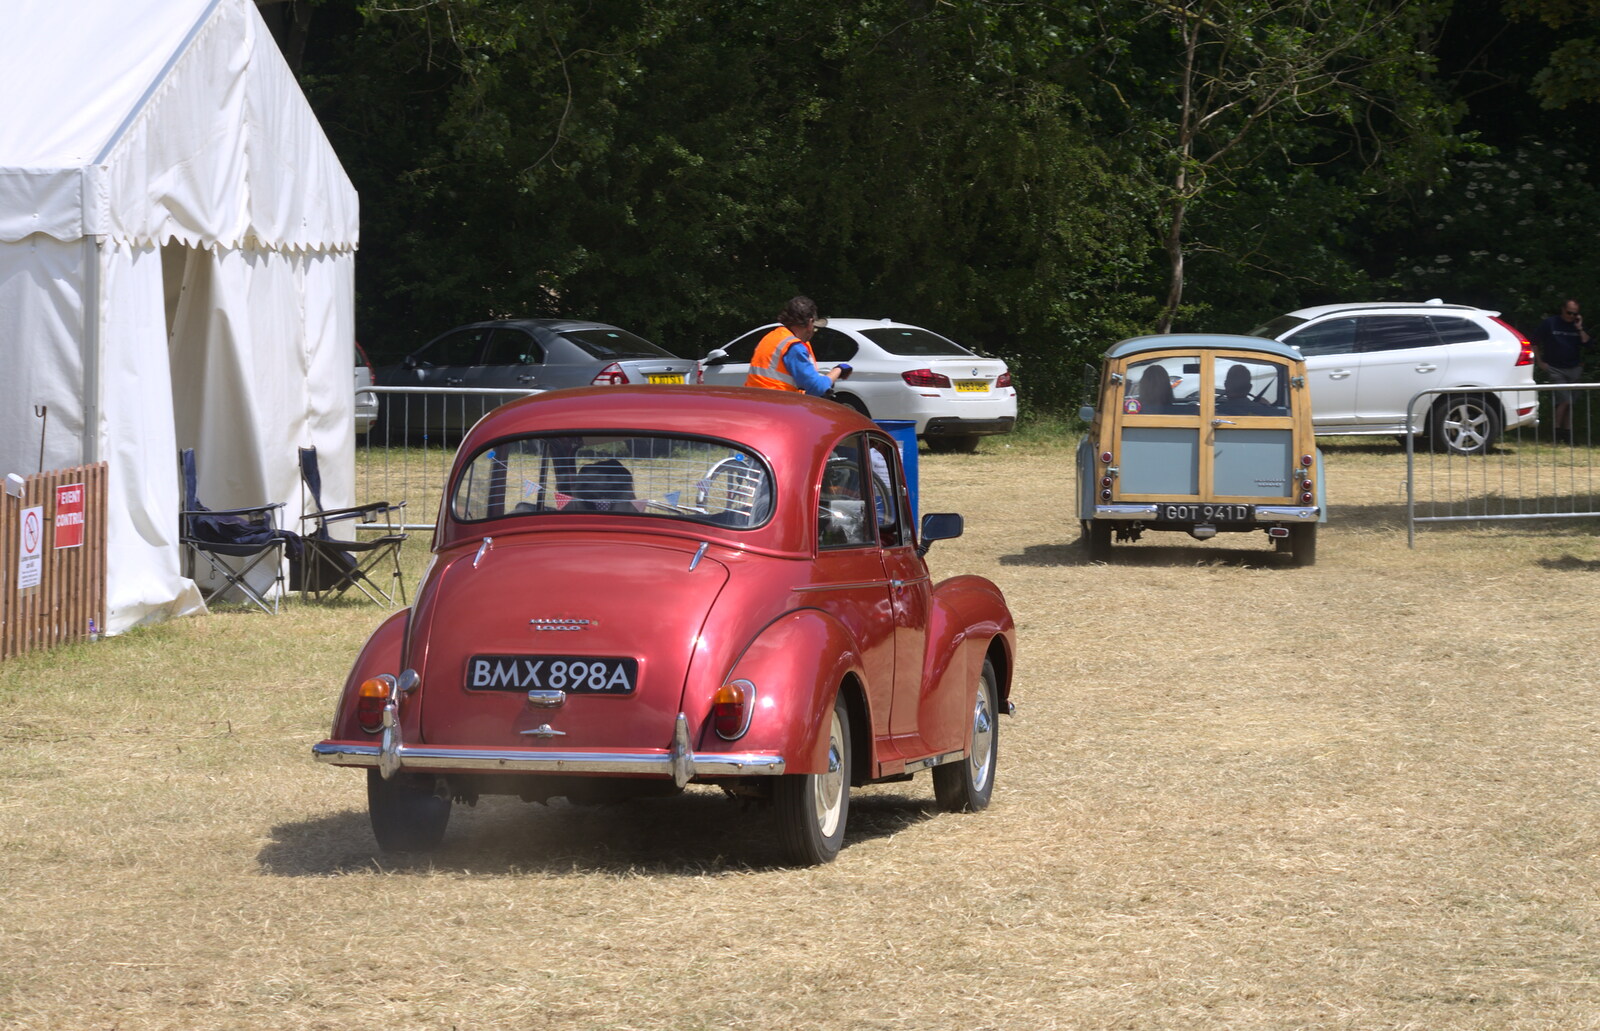 A shiny pink/red Morris Minor drives away from A Vintage Tractorey Sort of Day, Palgrave, Suffolk - 21st June 2015